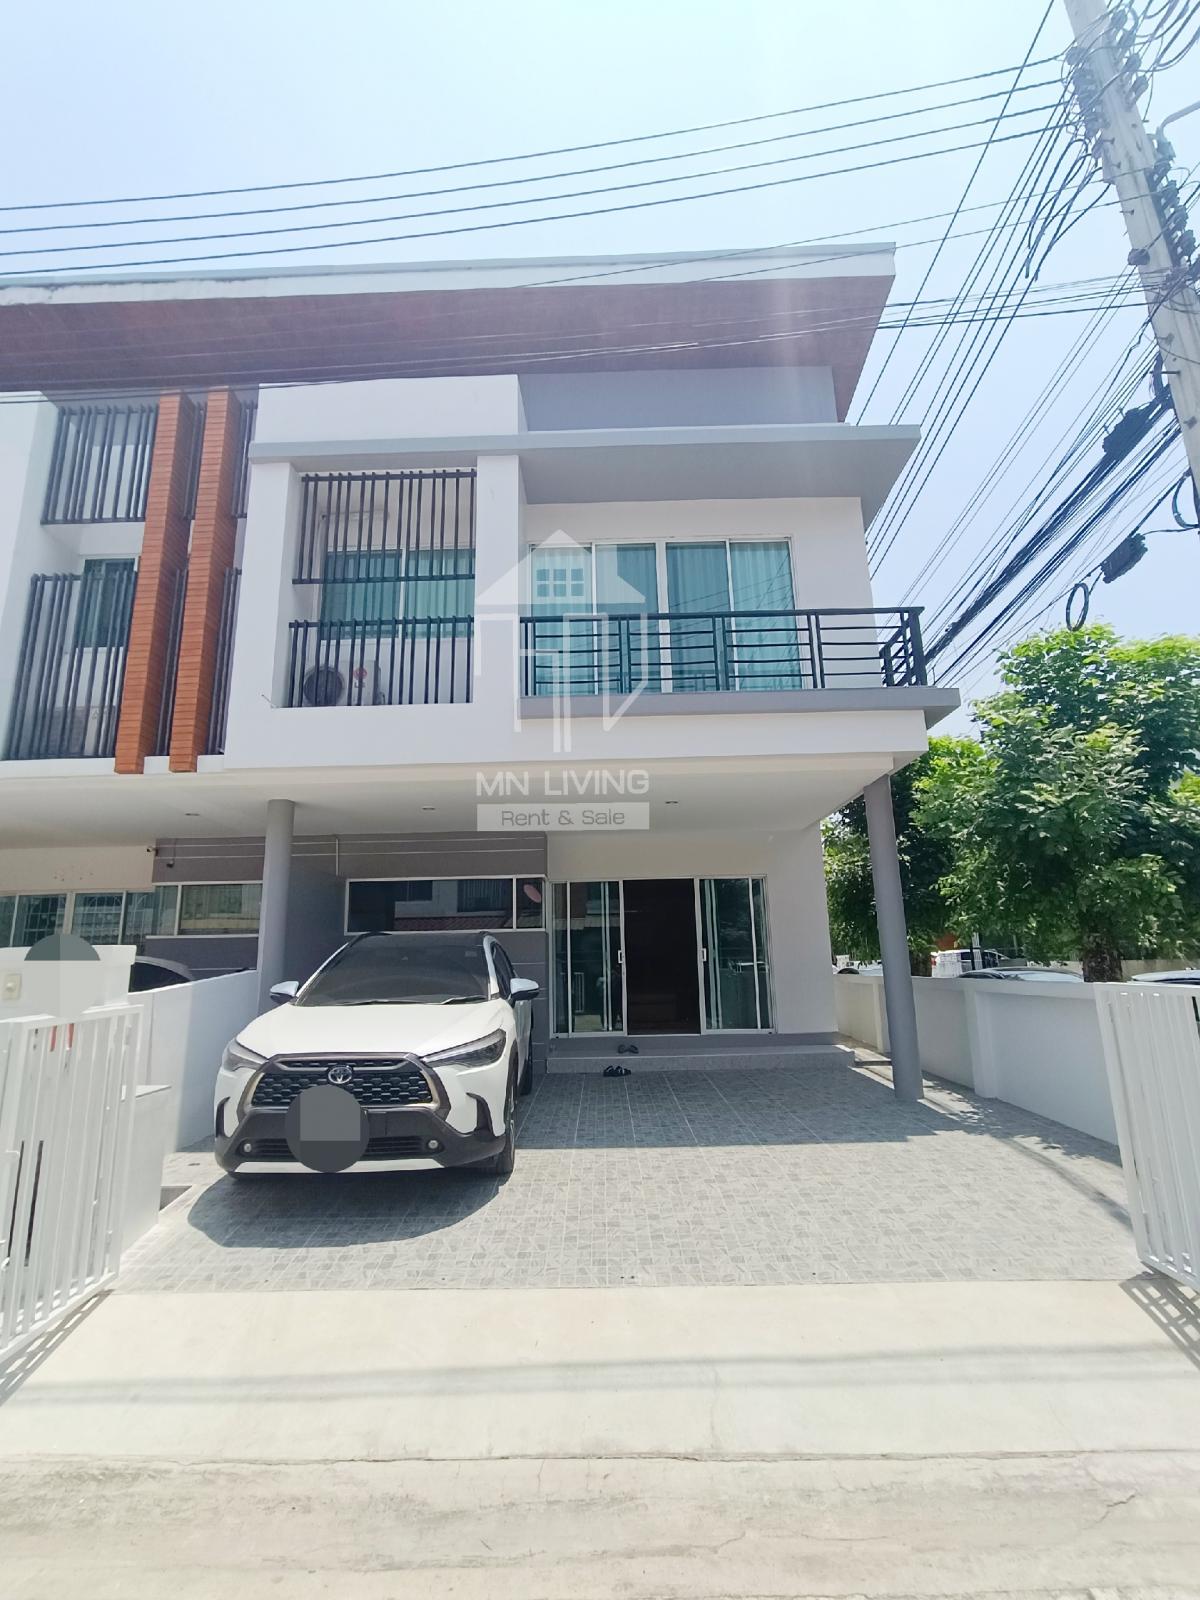 For RentTownhouseMin Buri, Romklao : 2-story townhome for rent, Nirvana Cluster Ramkhamhaeng project, Soi Mistine, beautifully decorated house, recently renovated.